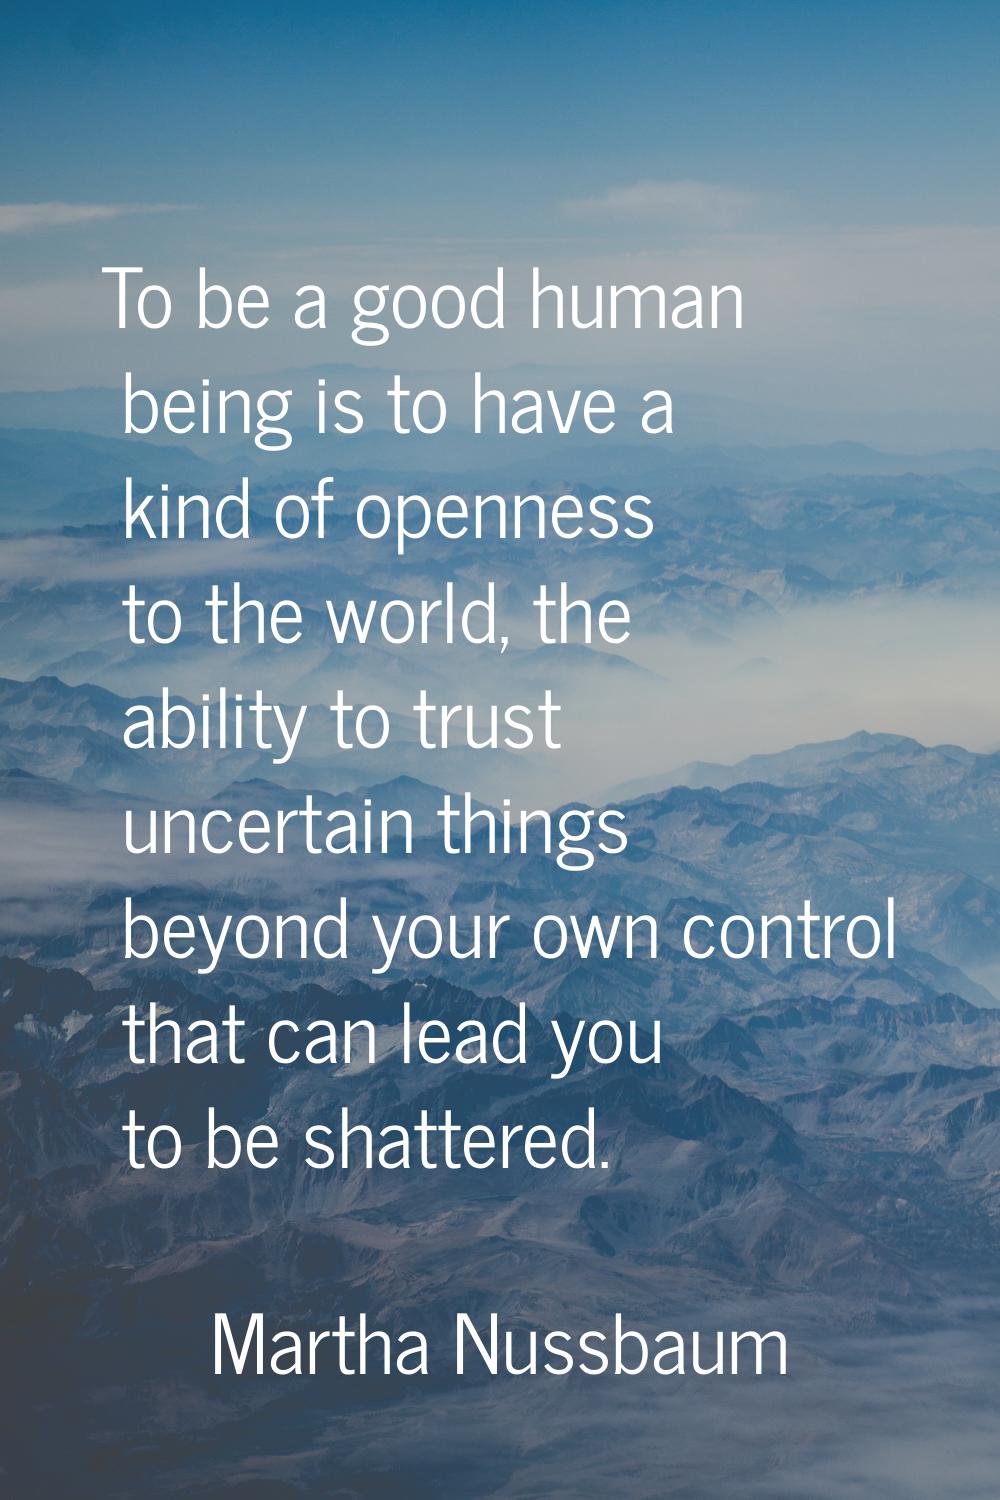 To be a good human being is to have a kind of openness to the world, the ability to trust uncertain